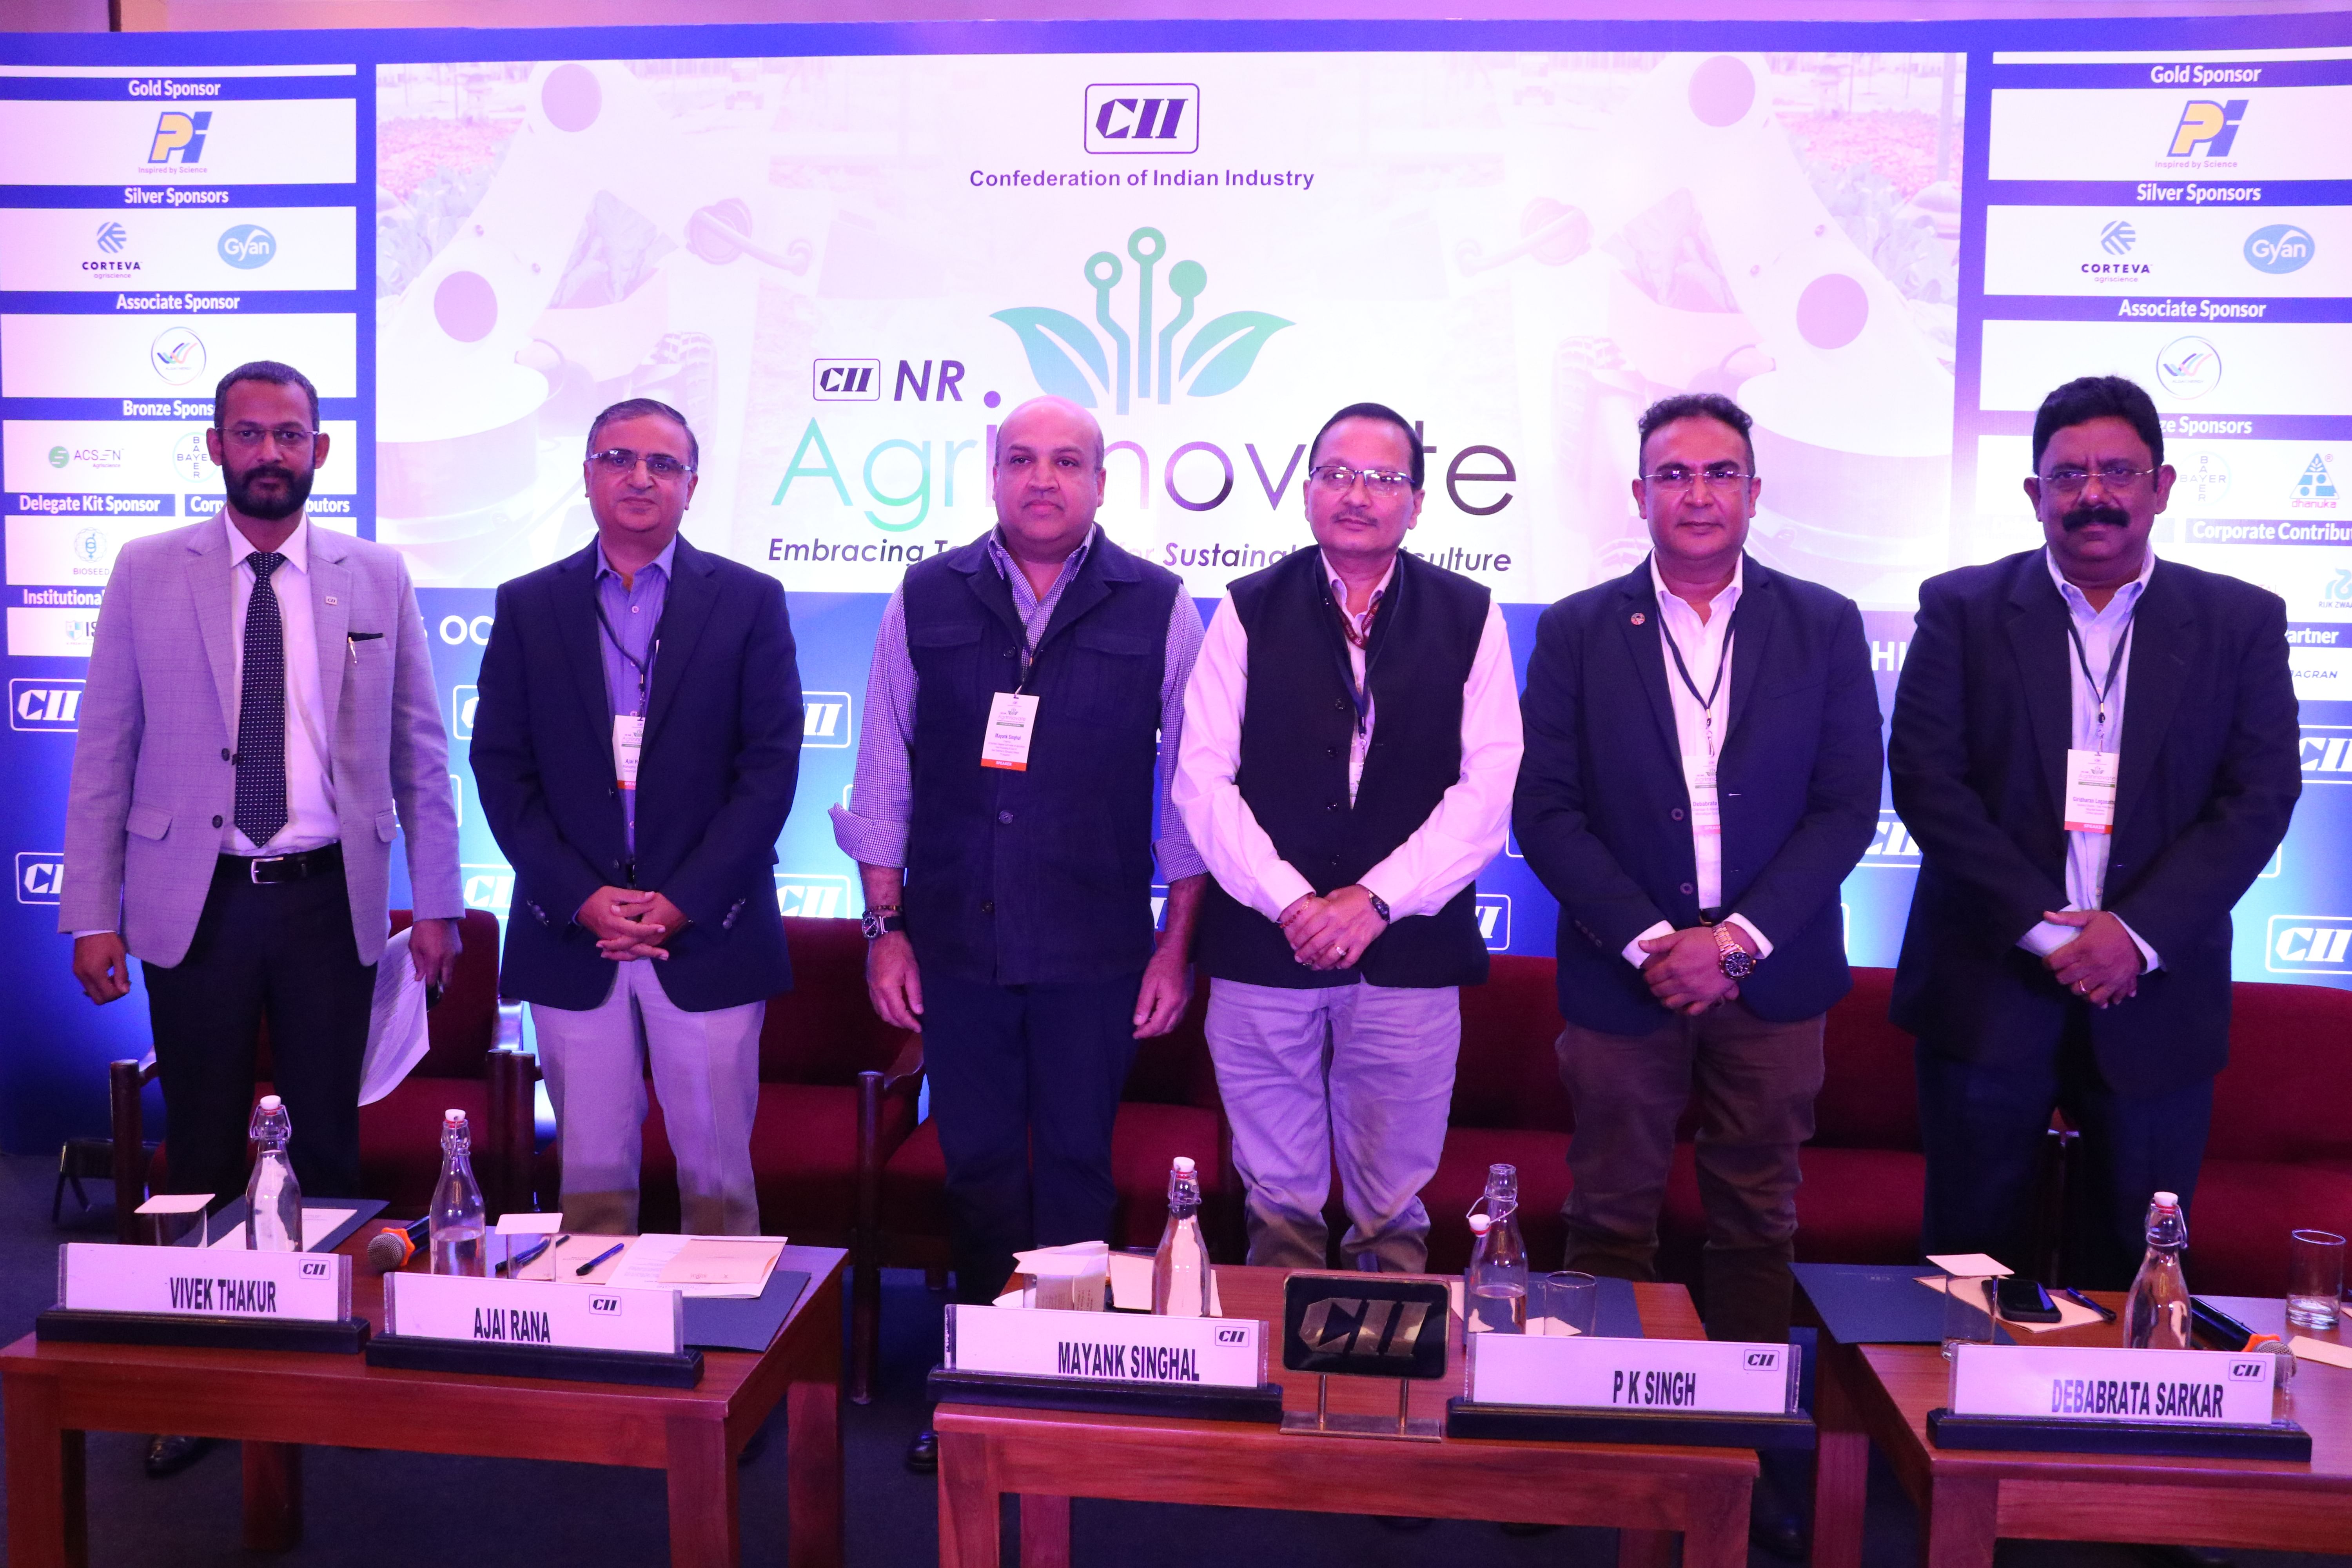 CII Agrinnovate: Embracing Technology for Sustainable Agriculture (Picture Courtesy; Krishi Jagran)